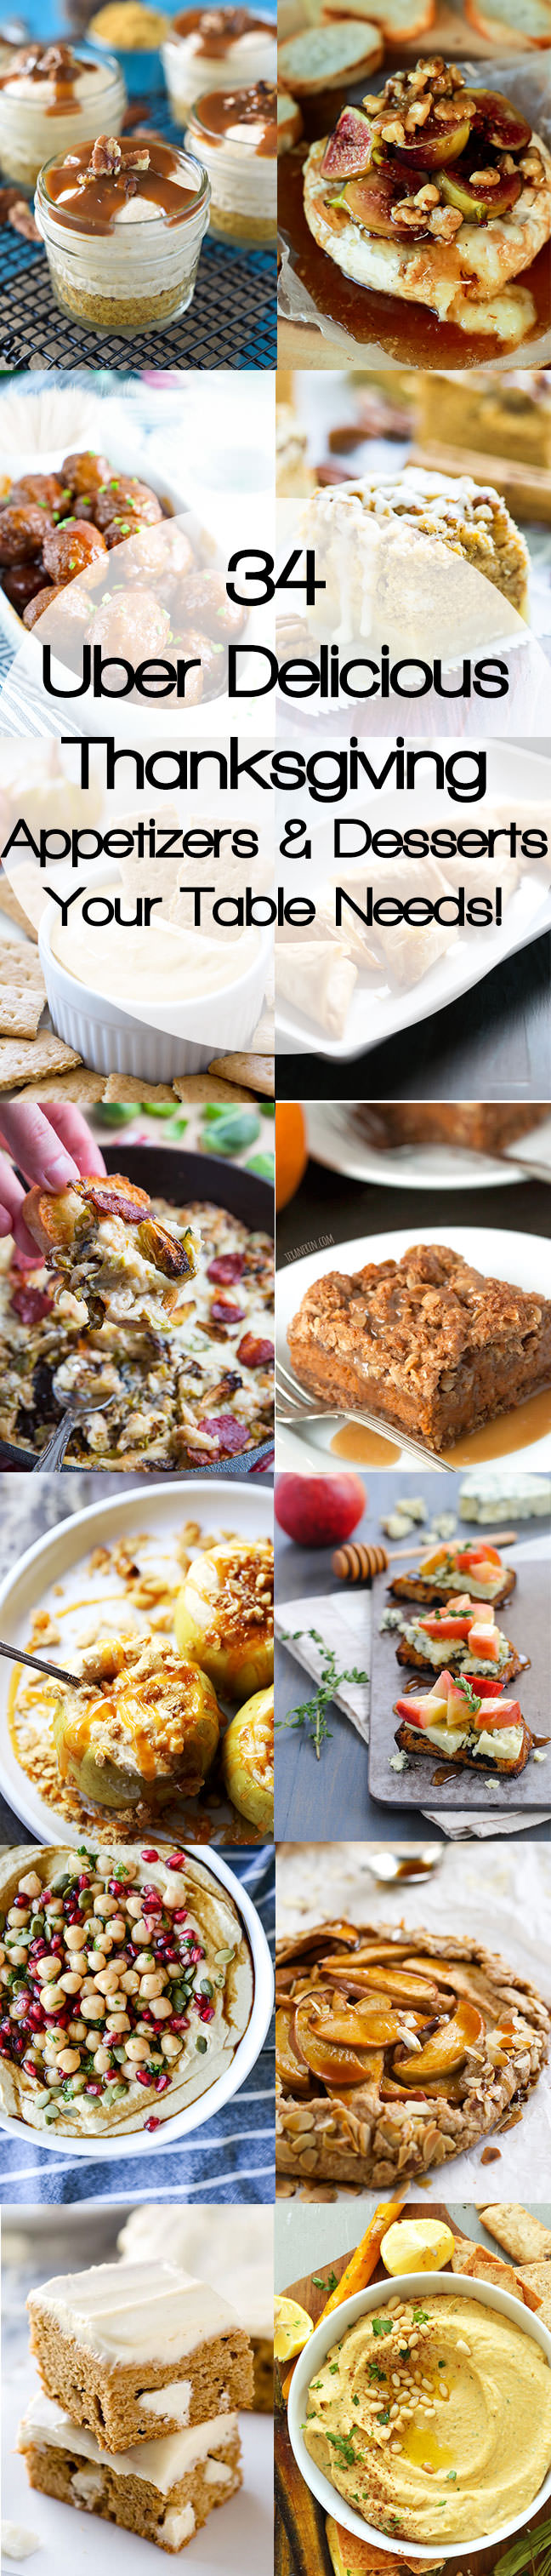 34 Über Delicious Thanksgiving Appetizers and Desserts Your Table Needs!